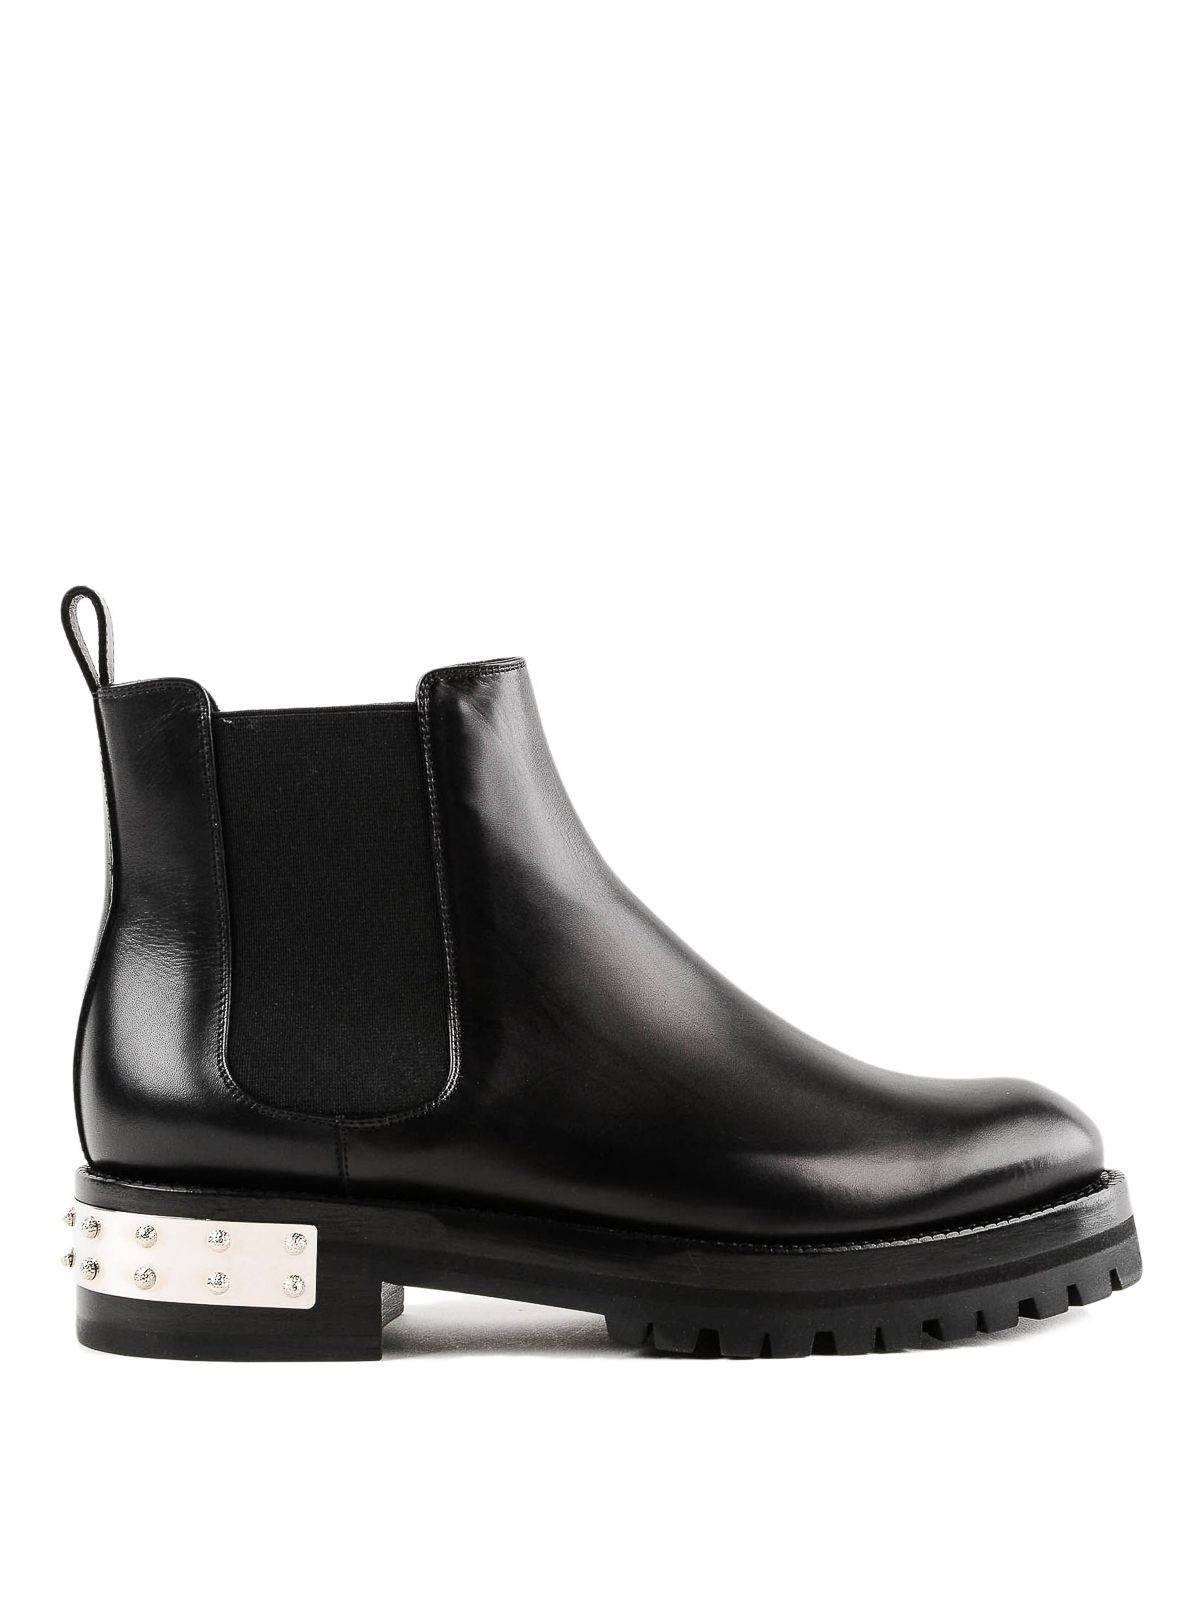 Feasibility let Mantle Ankle boots Alexander Mcqueen - Mod black leather booties - 462300WHPP11000